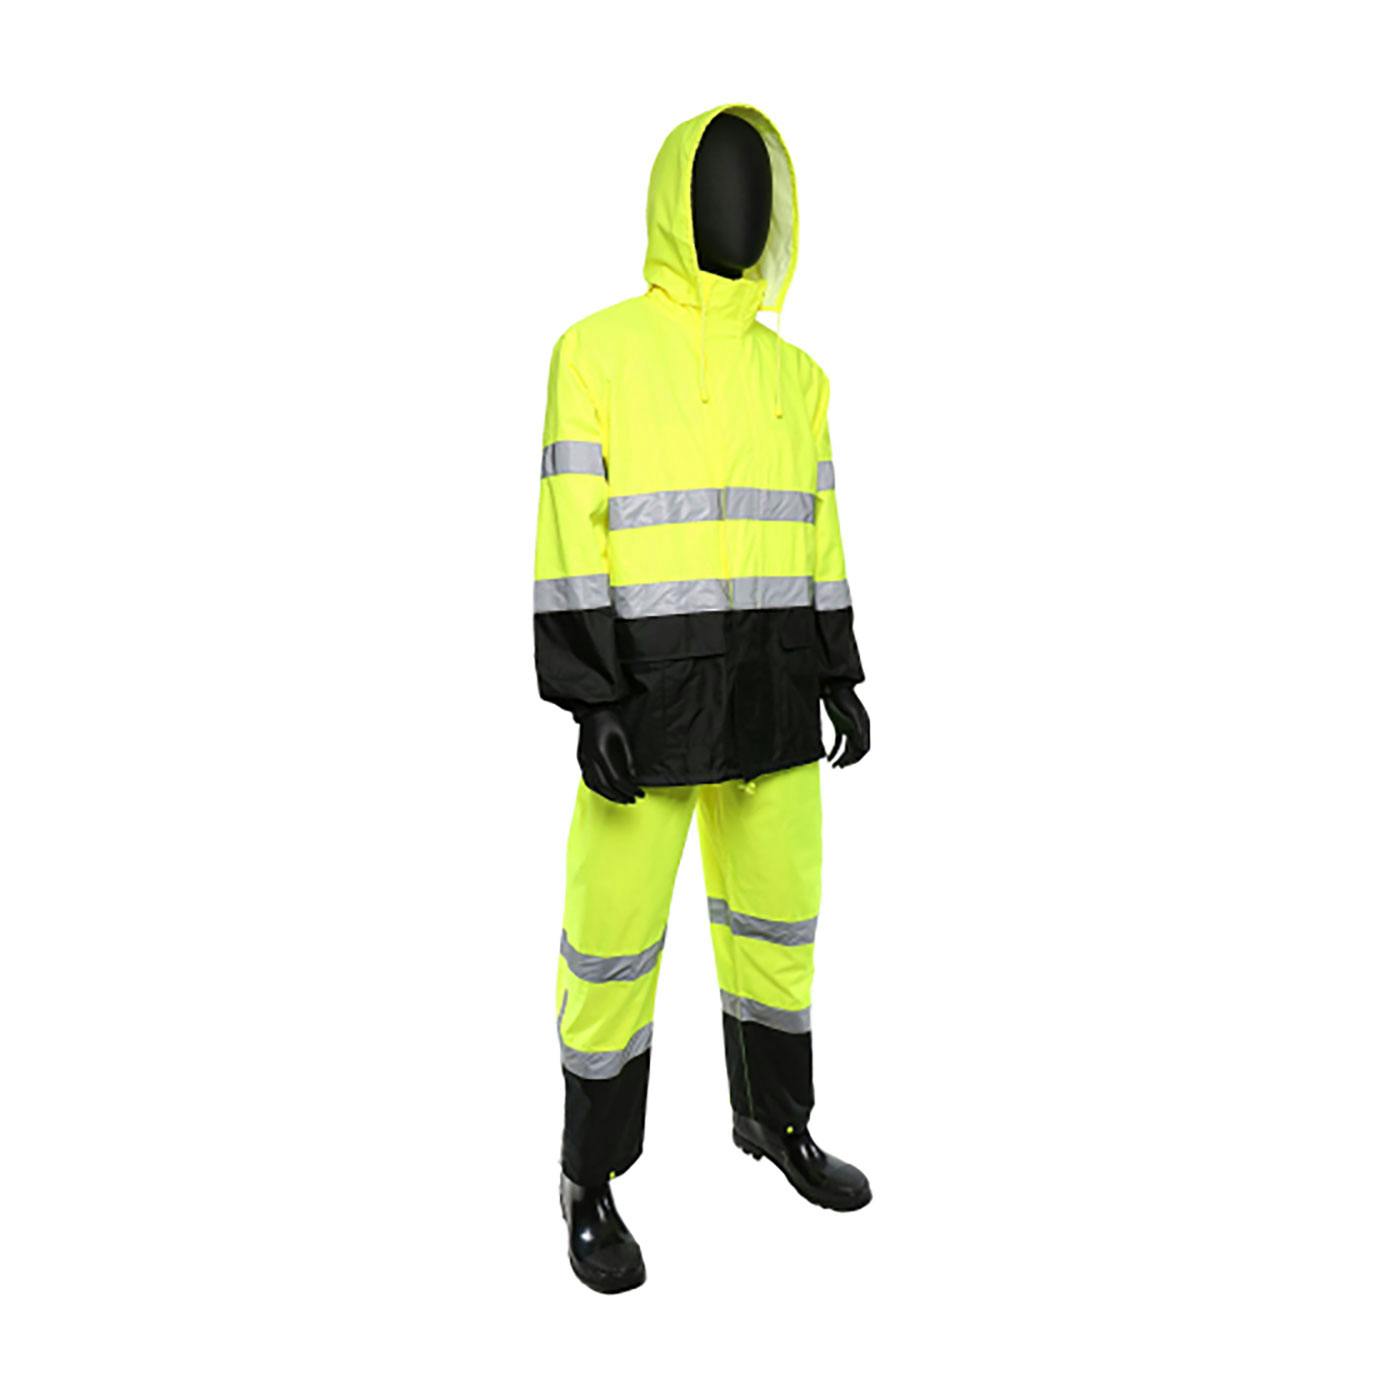 ANSI Type R Class 3 FR Treated Two-Piece Rain Suit with Black Bottom, Hi-Vis Yellow (4530SE)